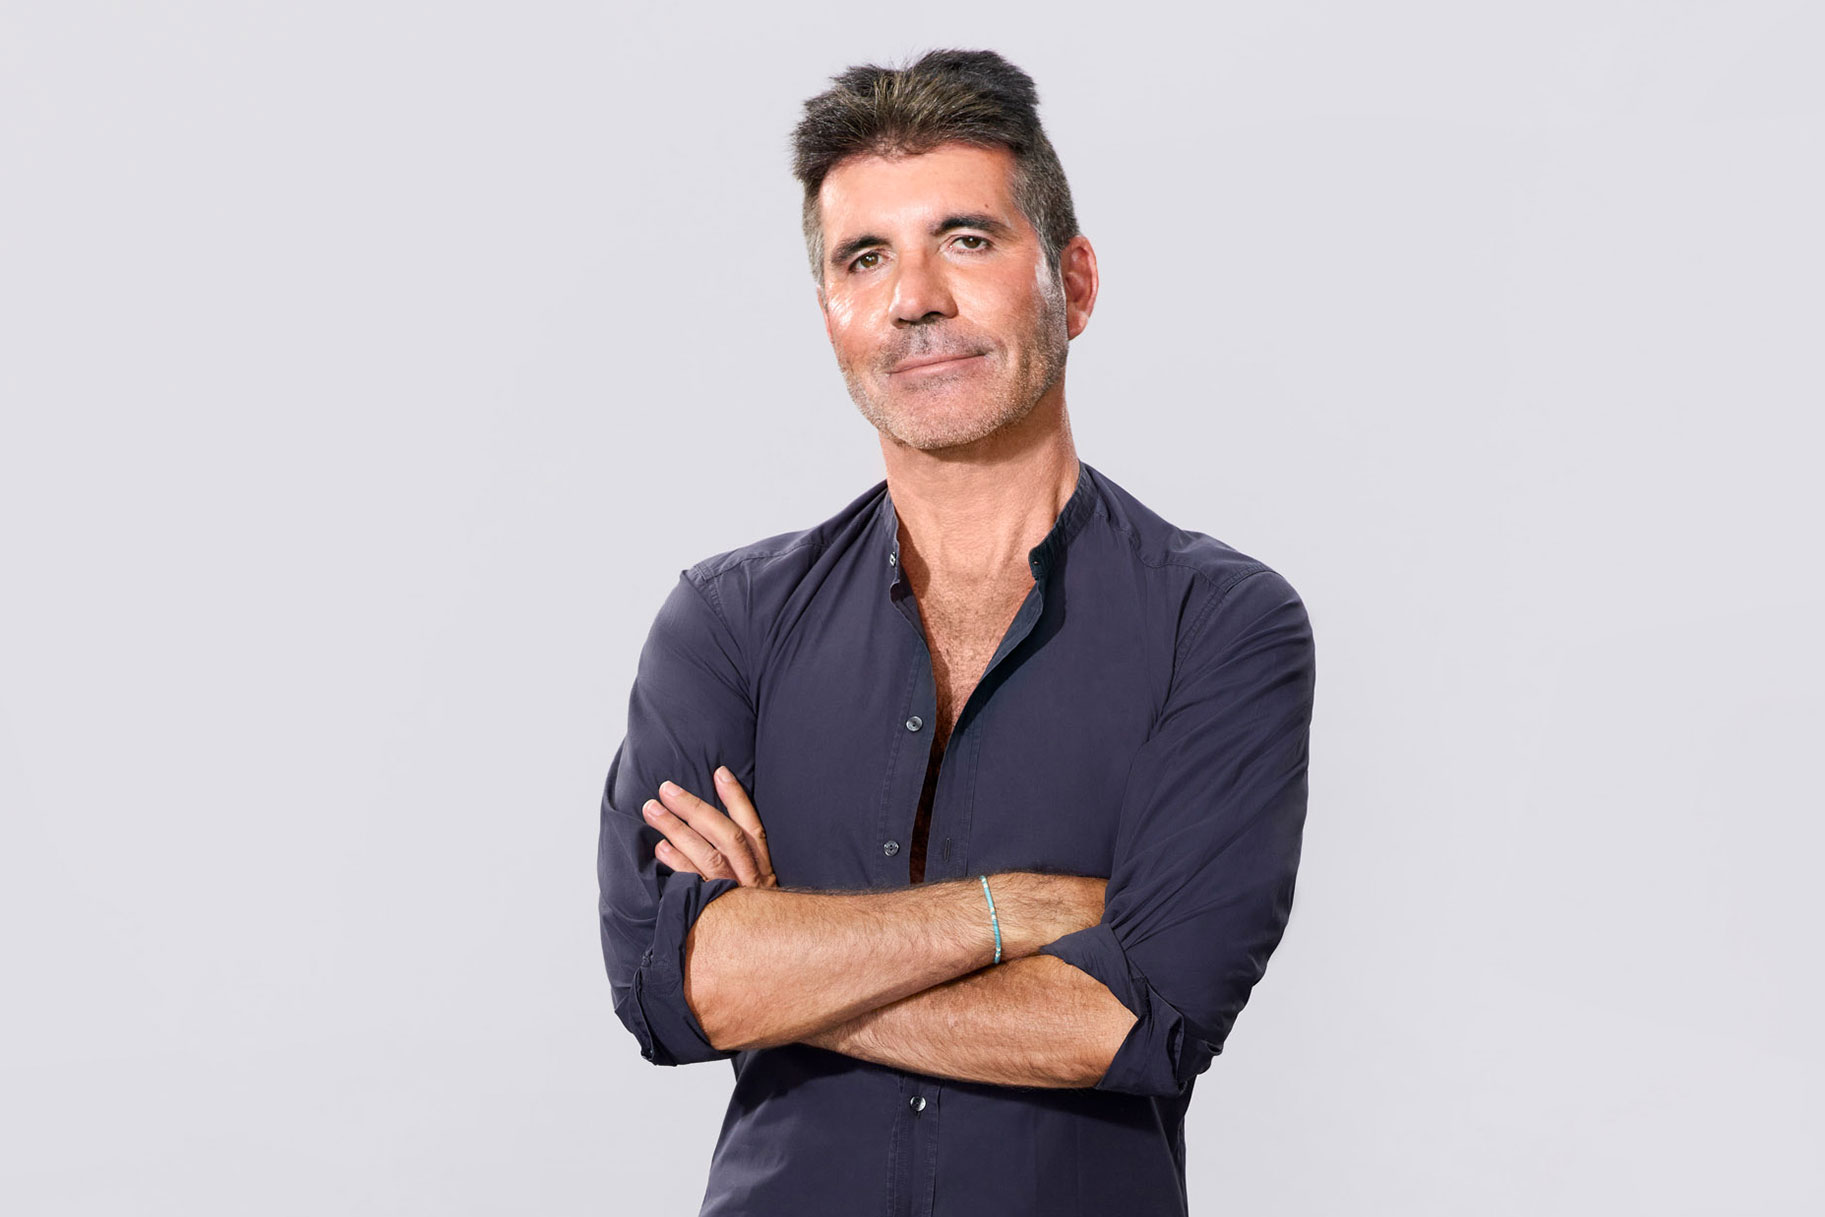 AGT and AGT: Extreme Judge Simon Cowell